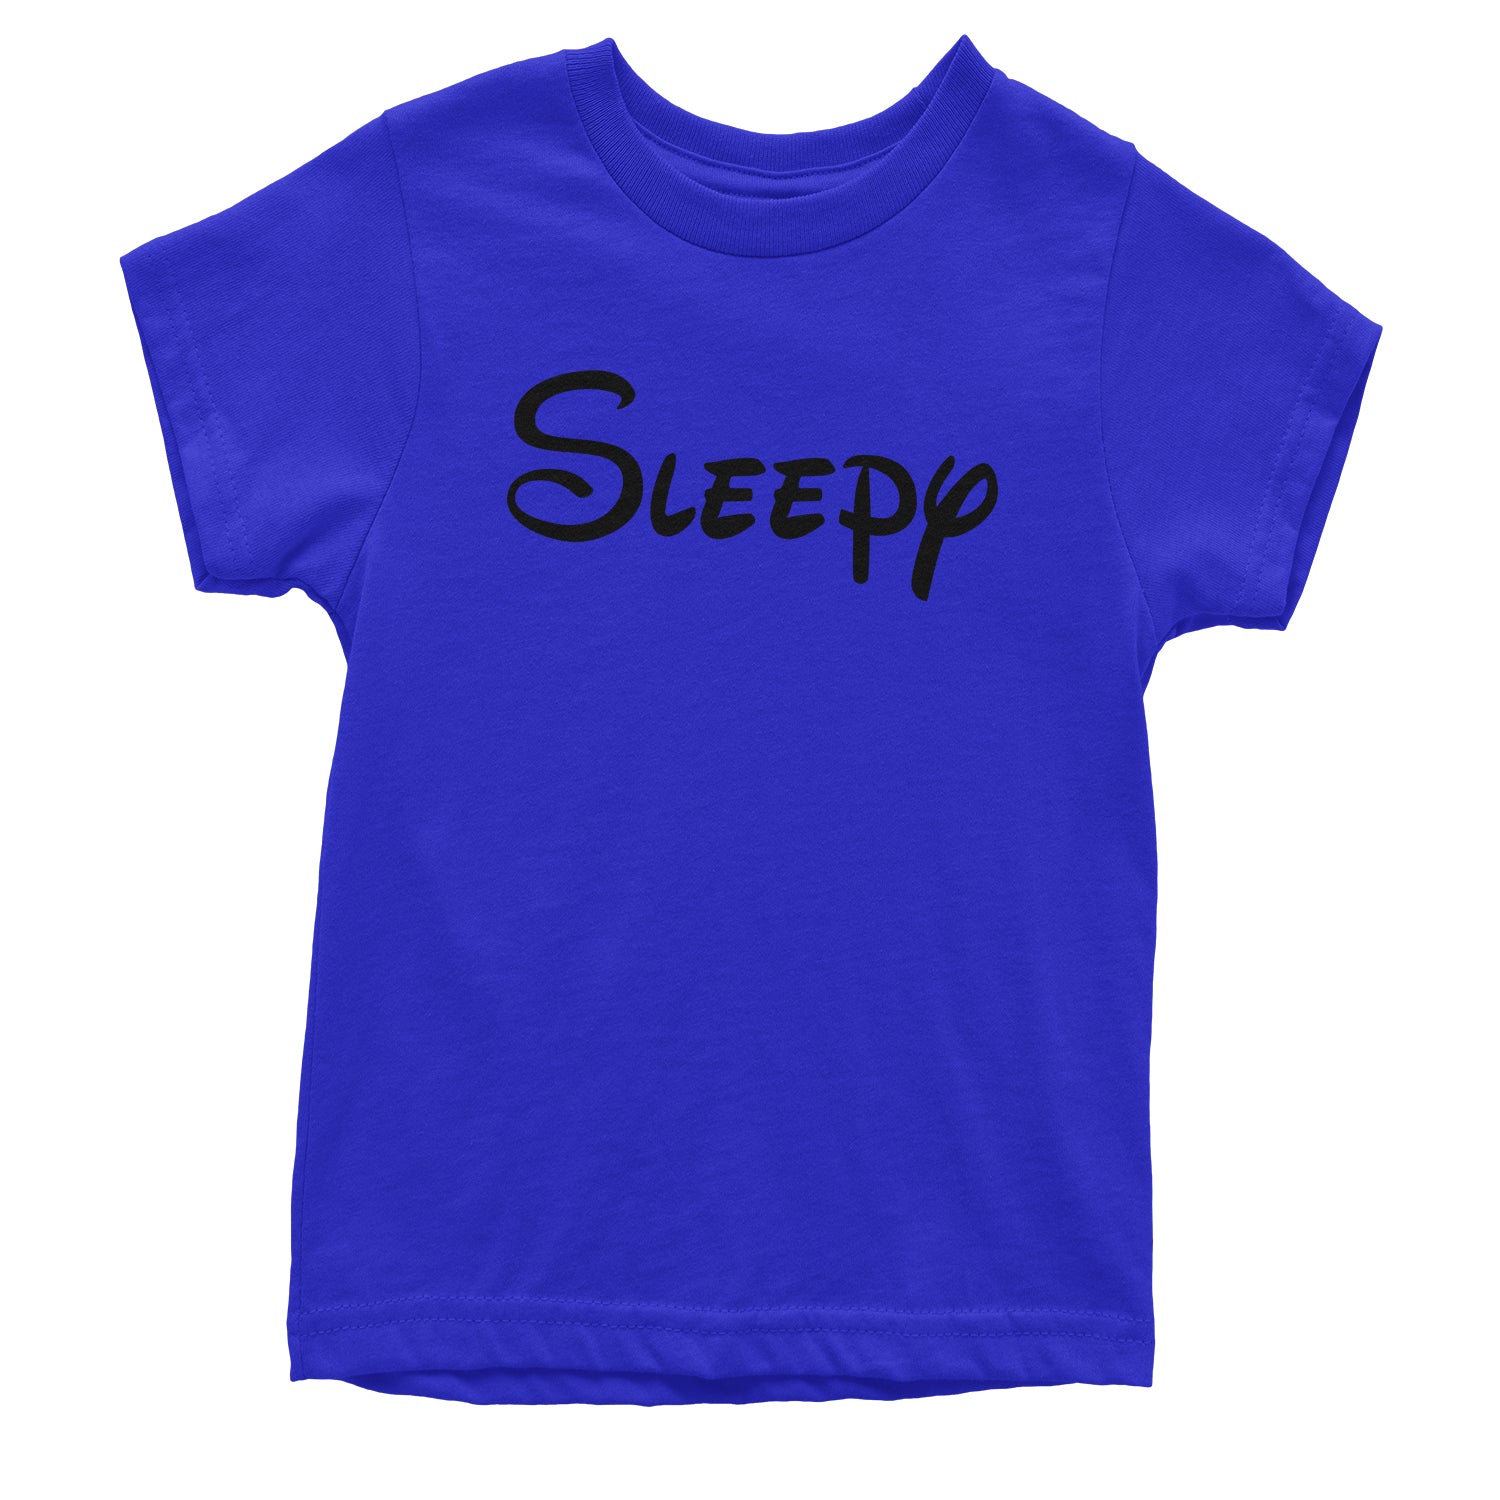 Sleepy - 7 Dwarfs Costume Youth T-shirt and, costume, dwarfs, group, halloween, matching, seven, snow, the, white by Expression Tees